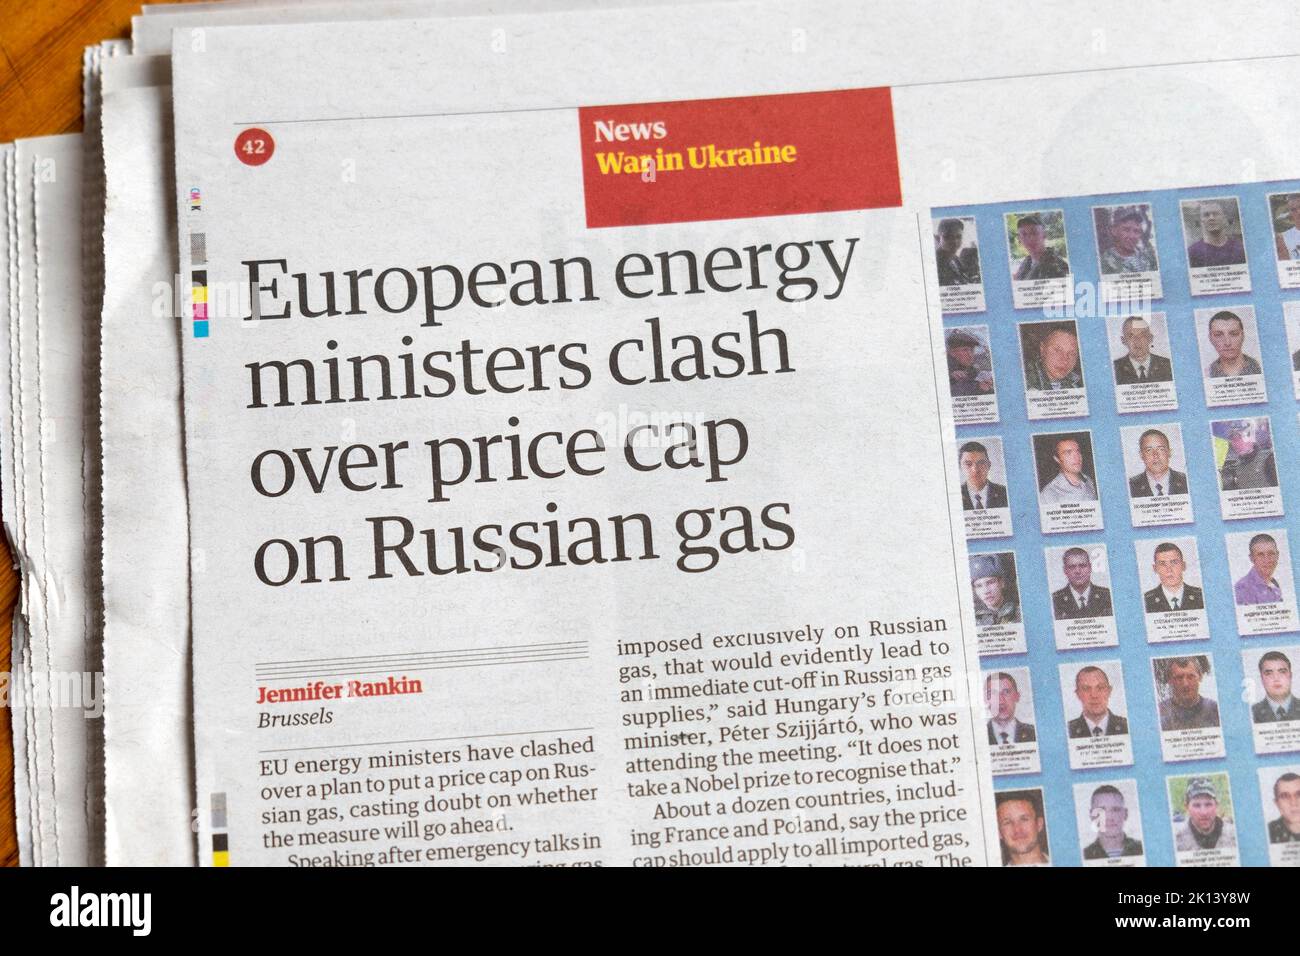 'European energy ministers clash over price cap on Russian gas' Guardian newspaper headline Ukraine war article clipping 10 September London UK Stock Photo